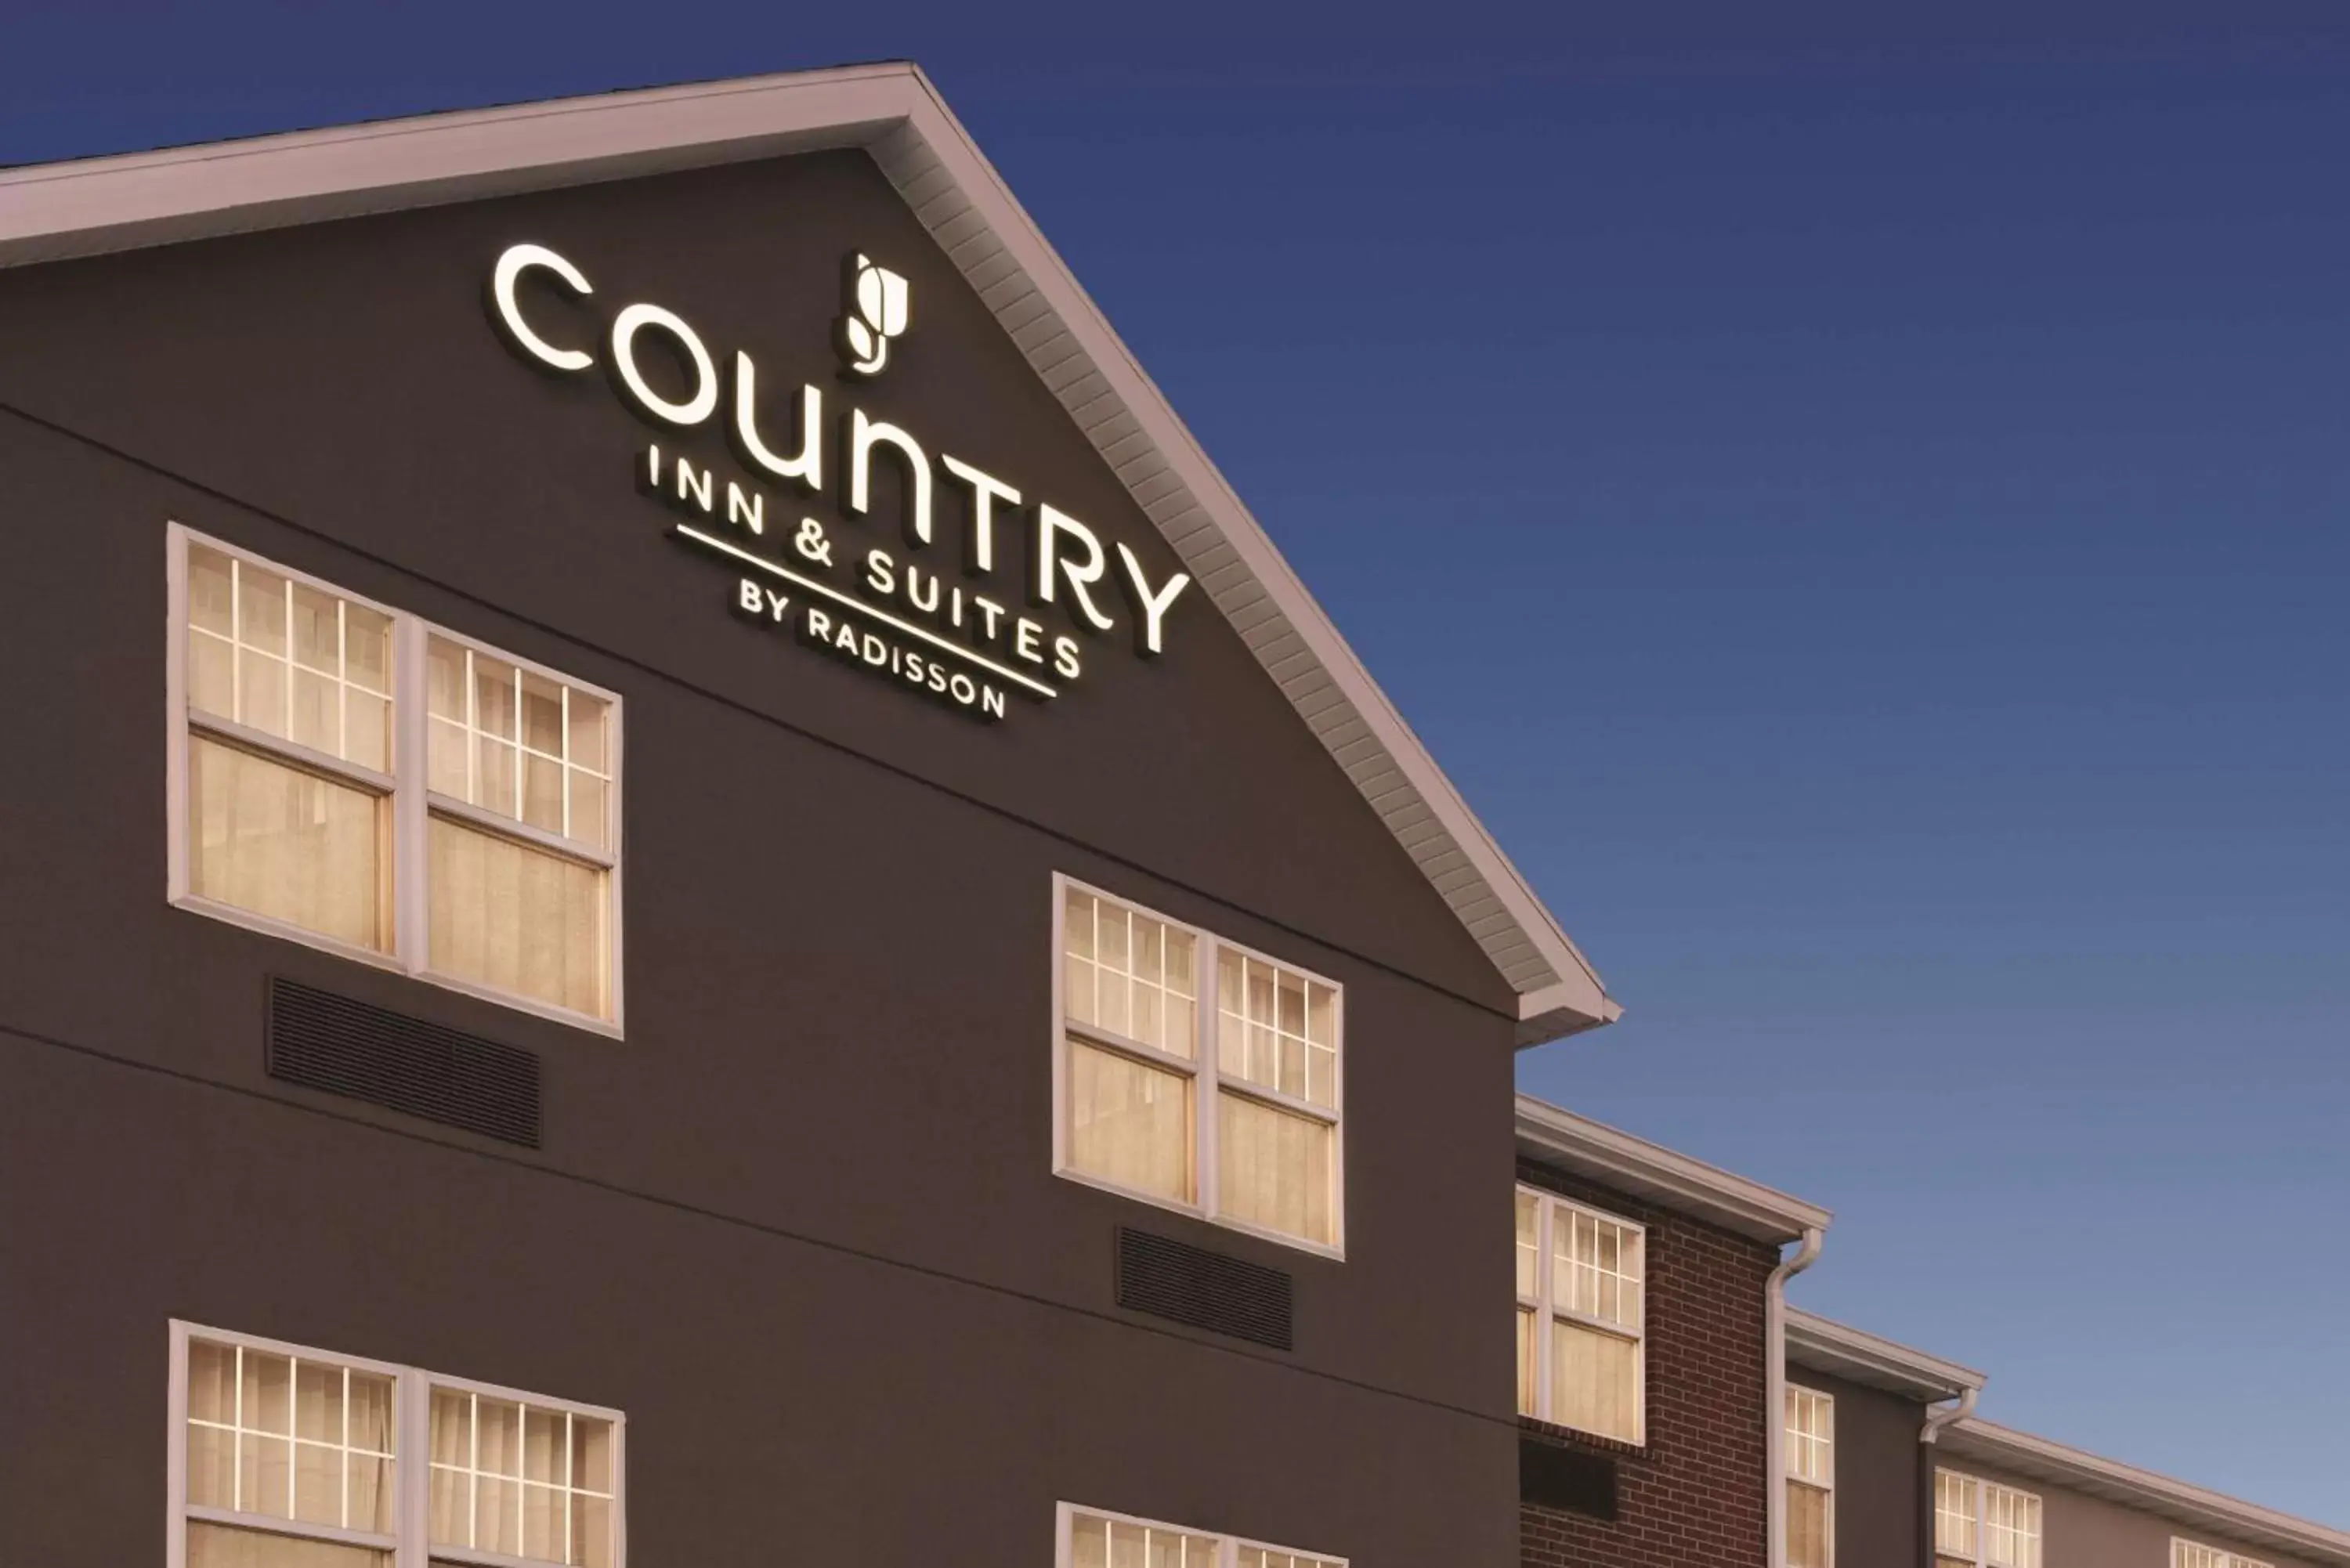 Property building in Country Inn & Suites by Radisson, Dubuque, IA